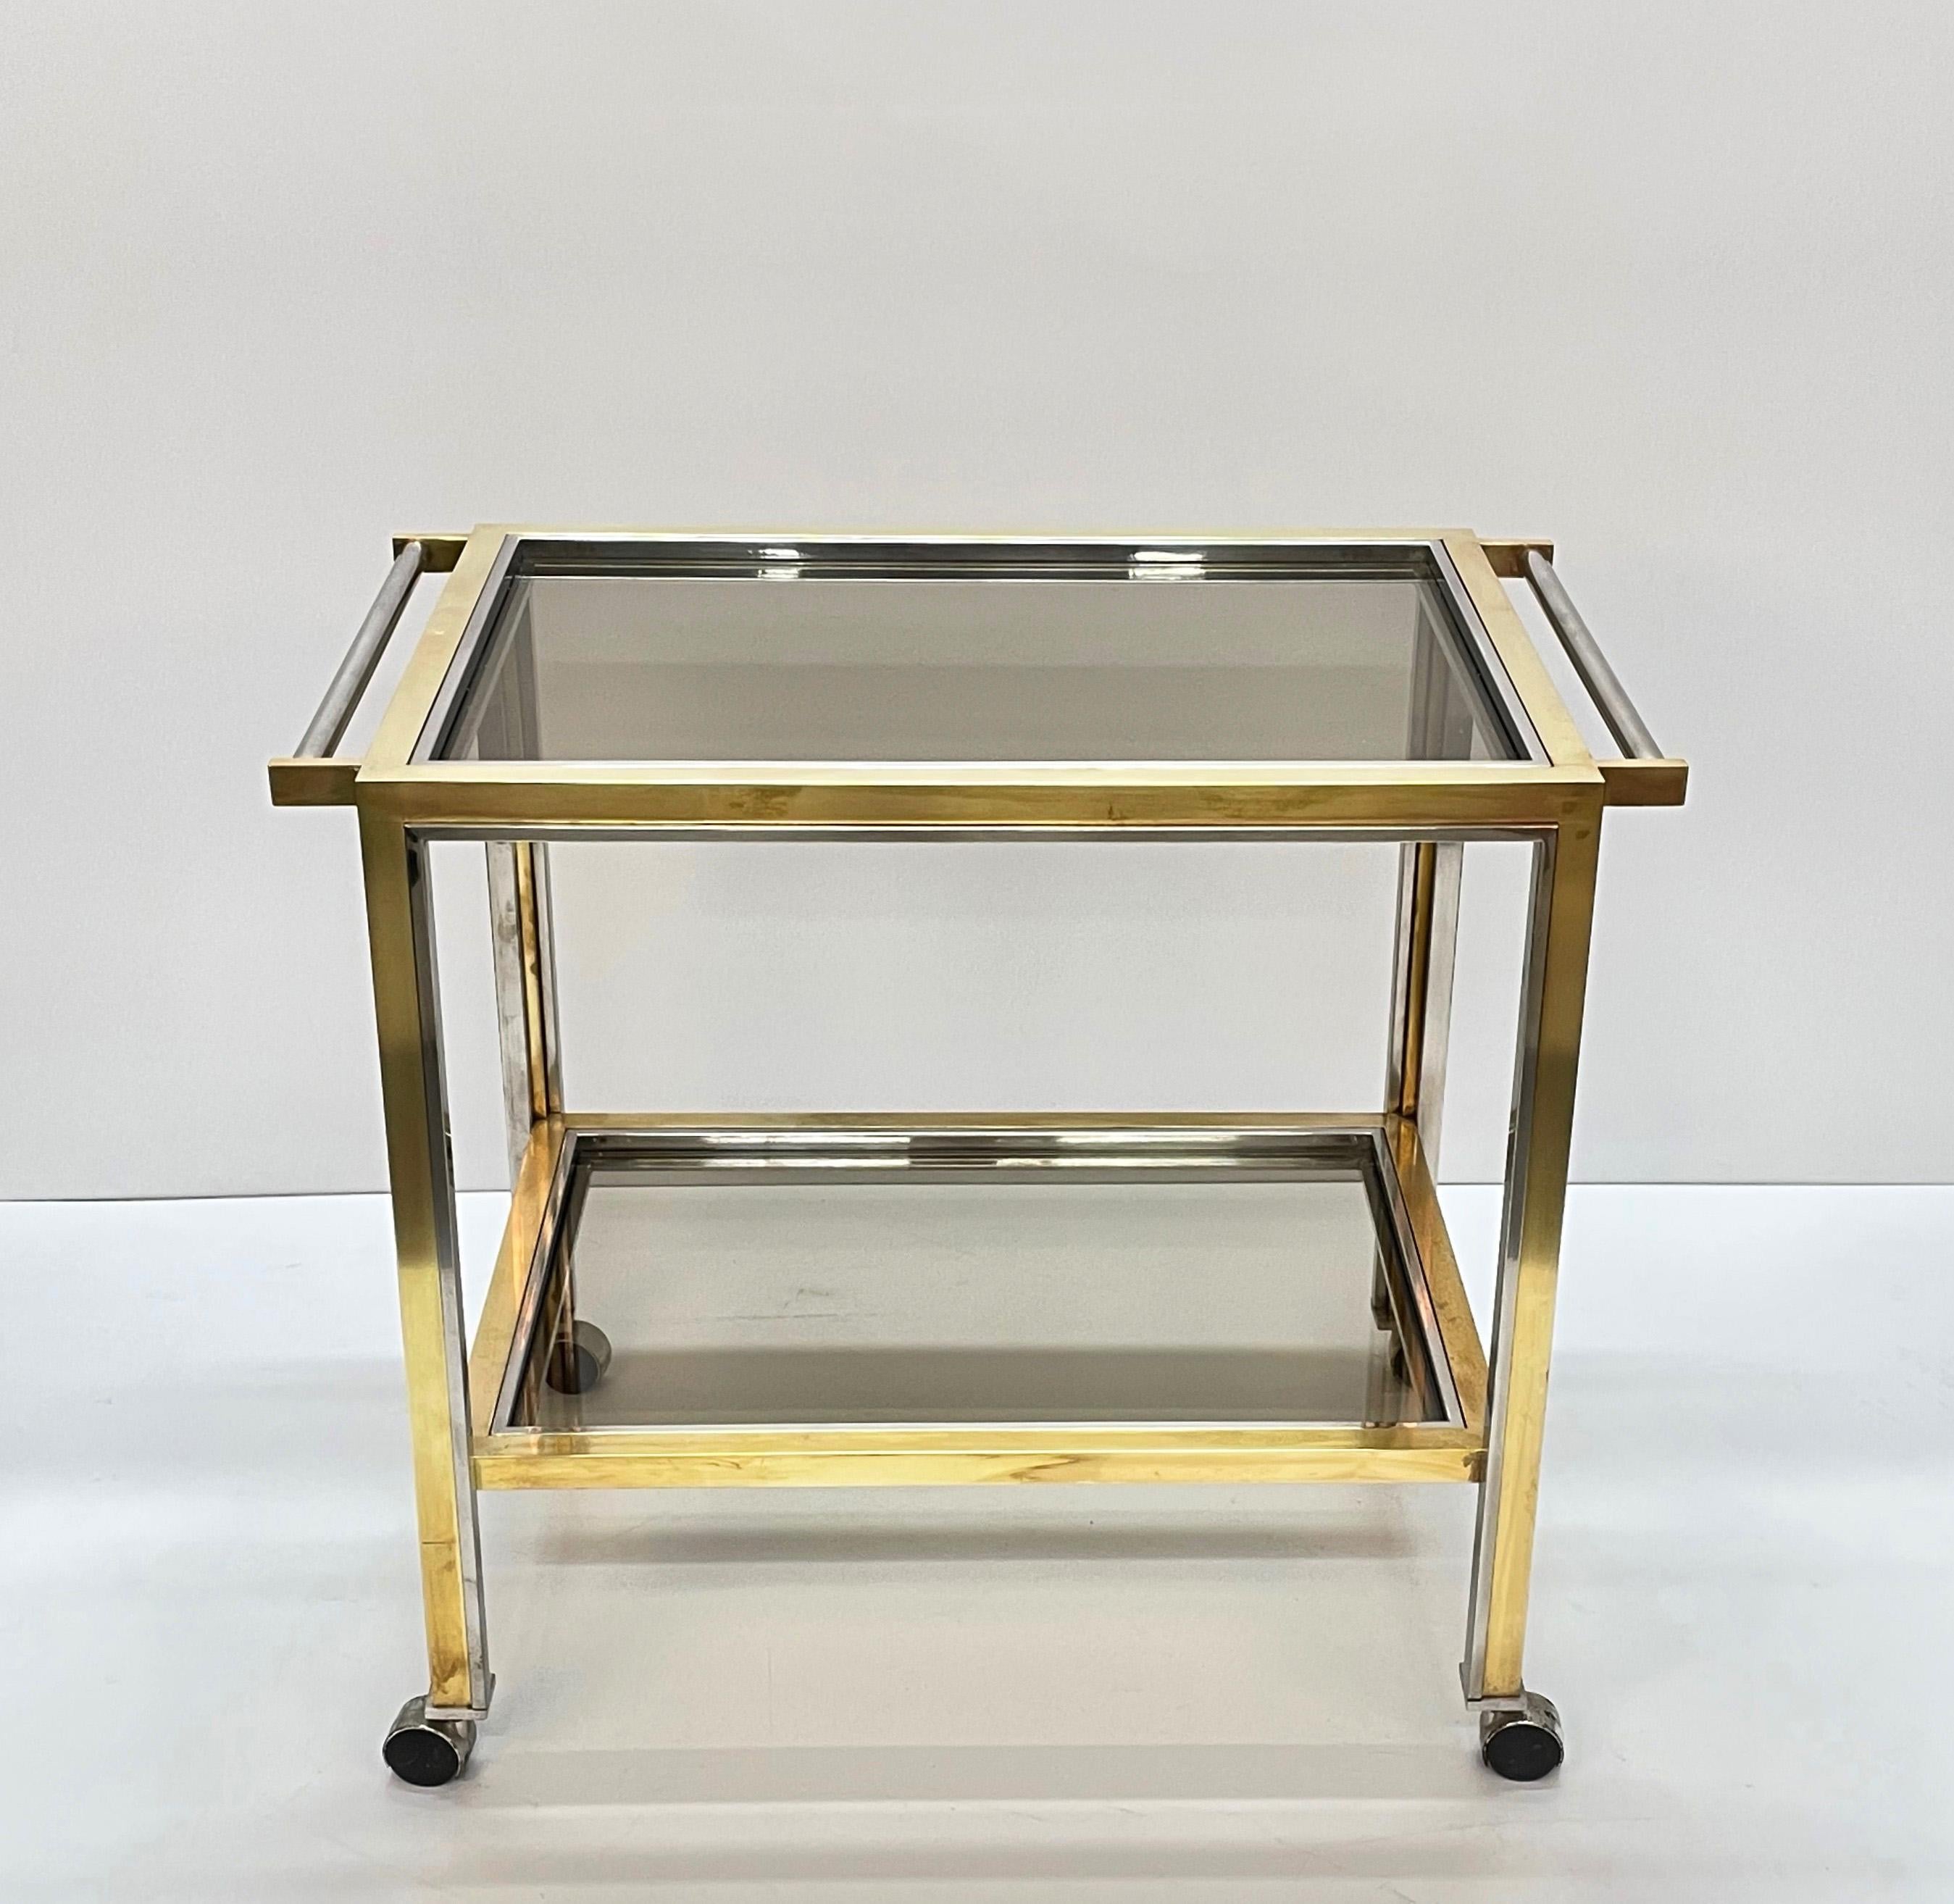 Beautiful bar trolley with Hollywood Regency design. This fantastic coffee table was made in Italy in the 1970s and is attributed to Romeo Rega.

This trolley with chromed steel handles has two smoked glass shelves. This fantastic piece features a